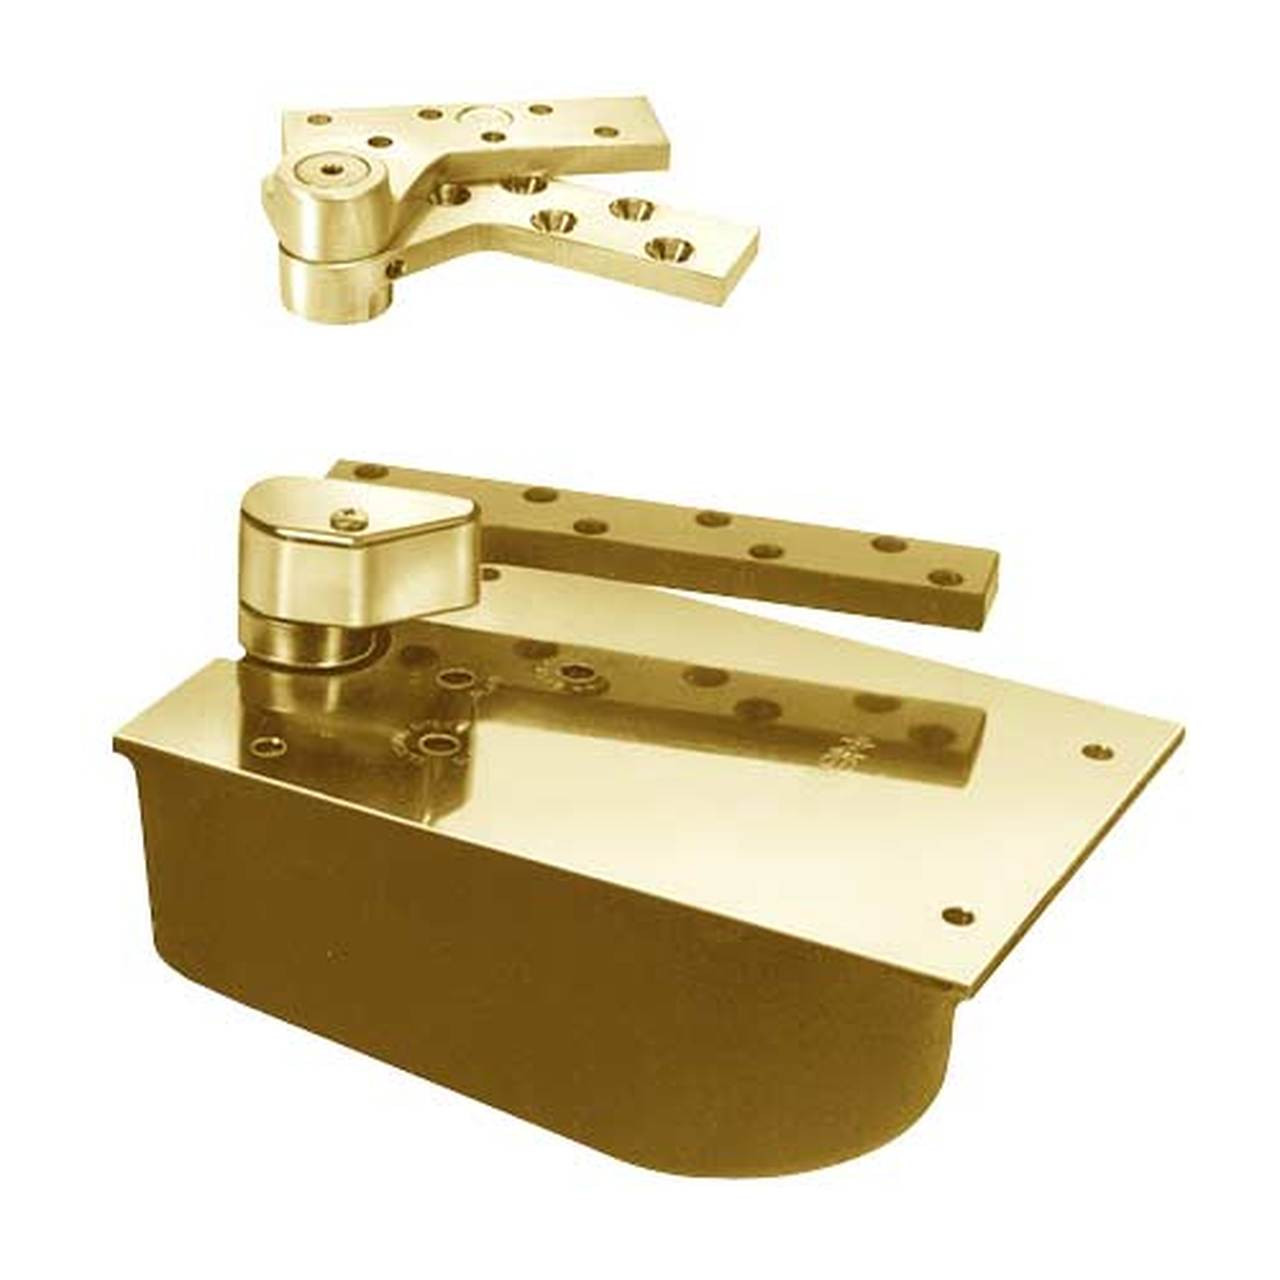 L27-90S-LCC-LH-605 Rixson 27 Series Extra Heavy Duty Lead Lined Offset Floor Closer in Bright Brass